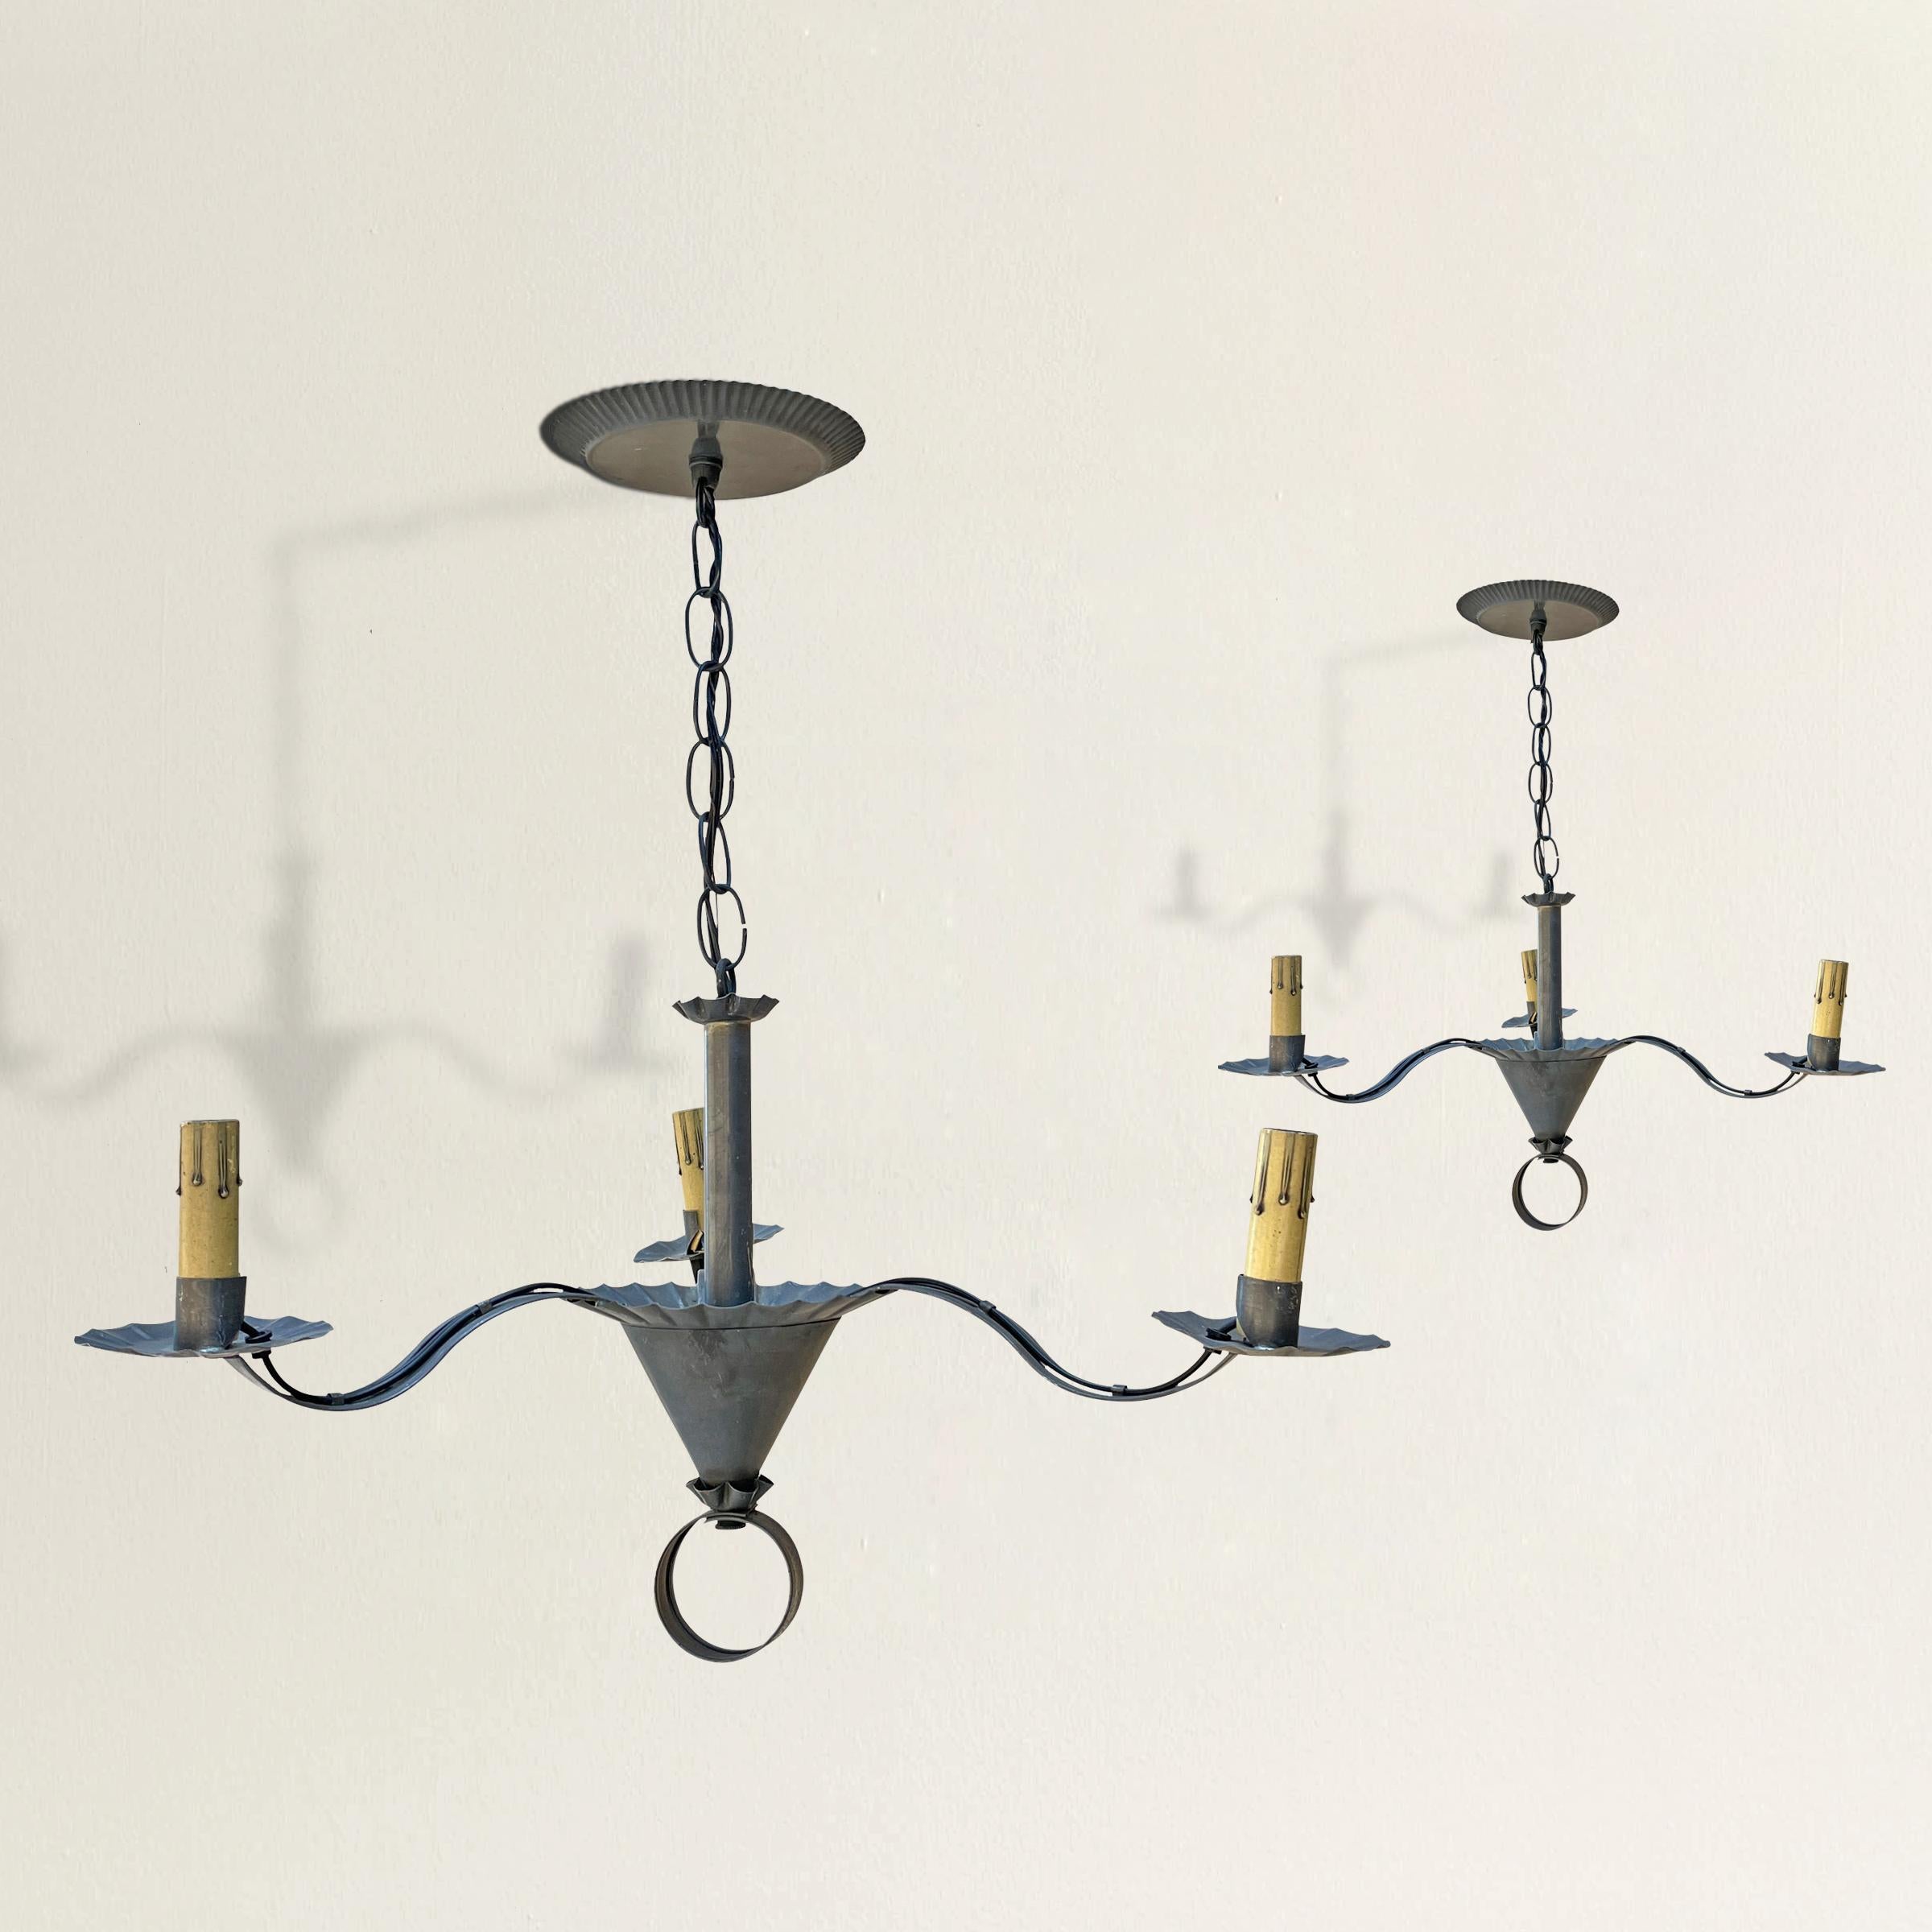 A charming pair of American tin three-arm chandeliers with conical bodies, pie-crust ruffled candle cups, and rings at the bottom of each. Wired for US with chandelier base sockets. Canopies included.